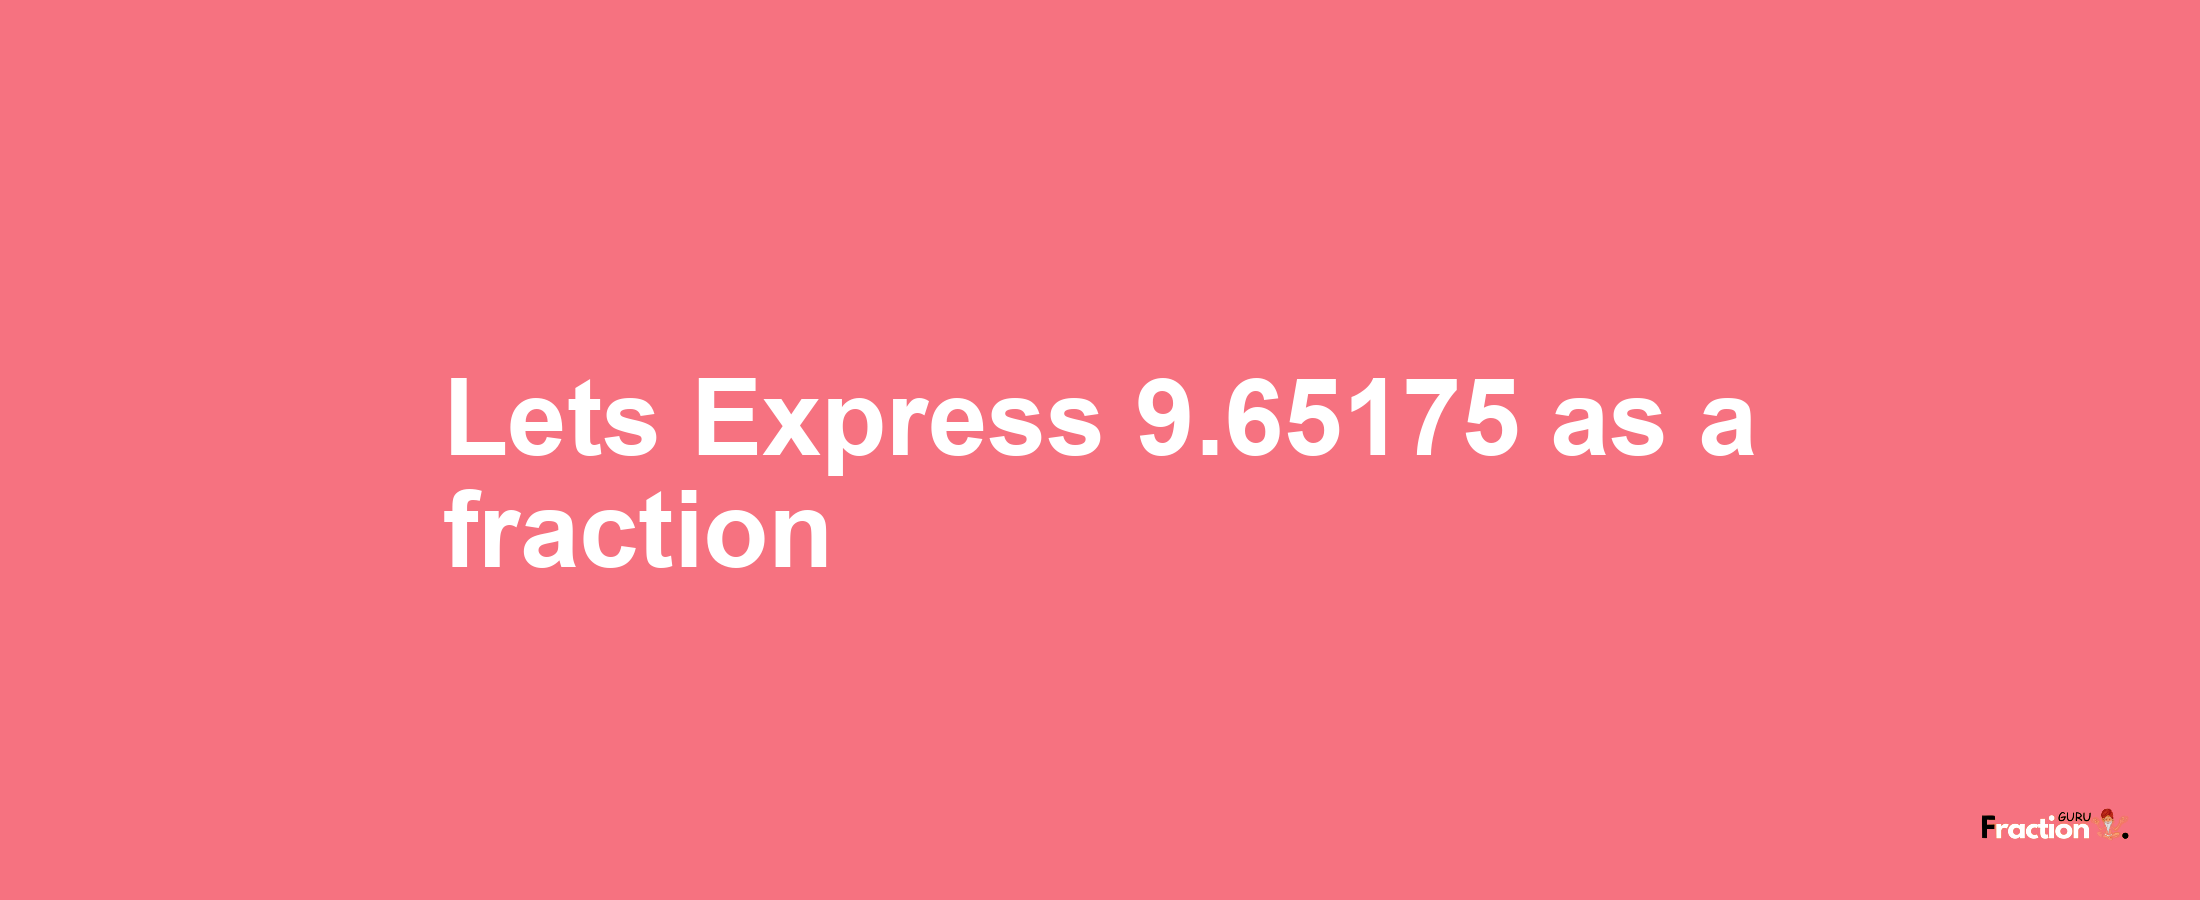 Lets Express 9.65175 as afraction